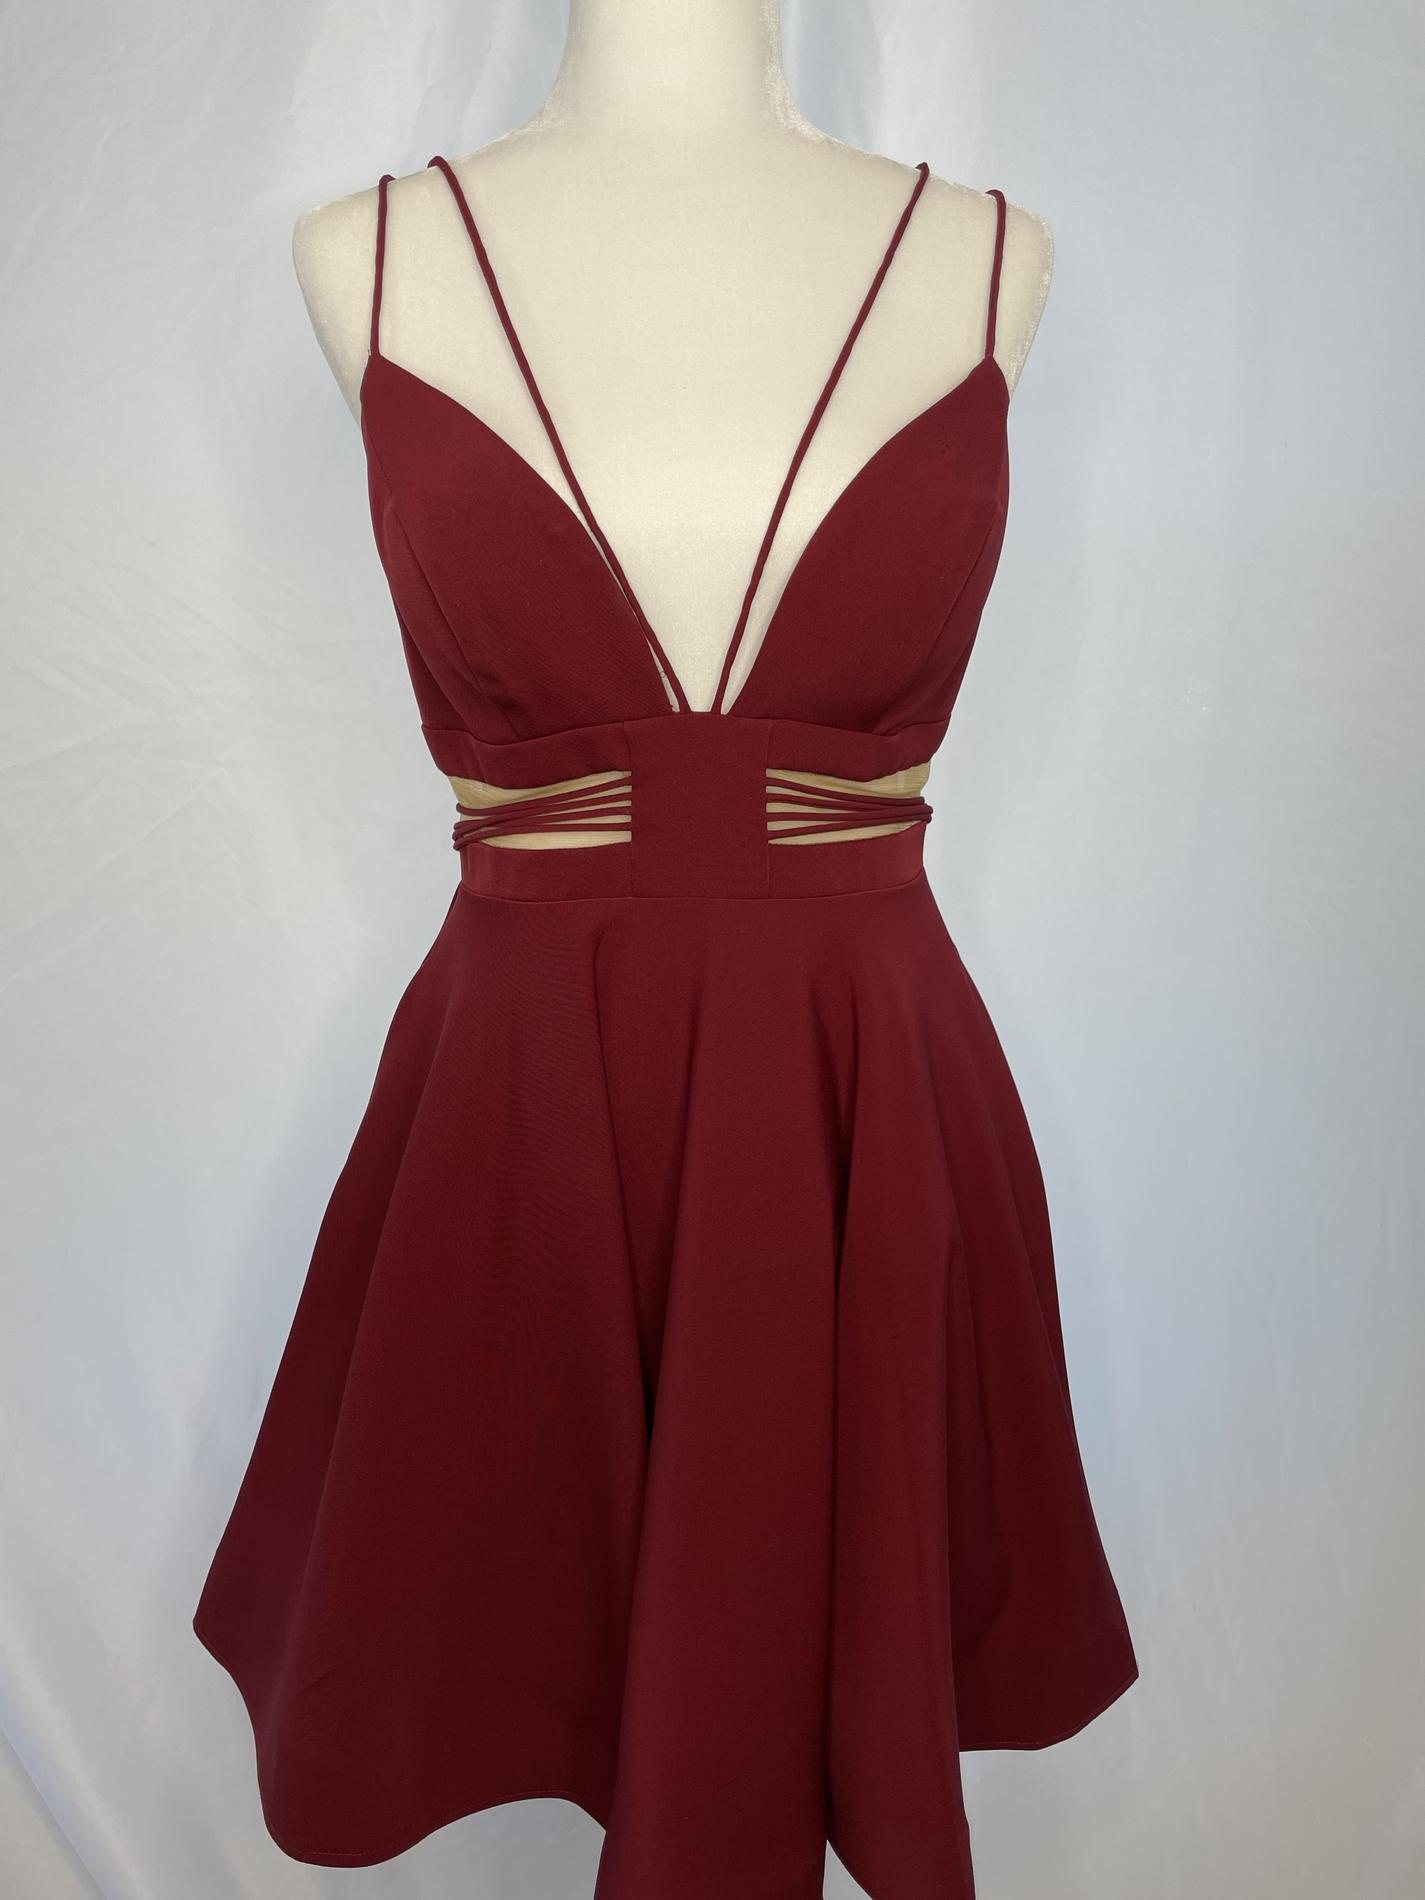 Sherri Hill Size 6 Homecoming Plunge Sheer Burgundy Red Cocktail Dress on Queenly